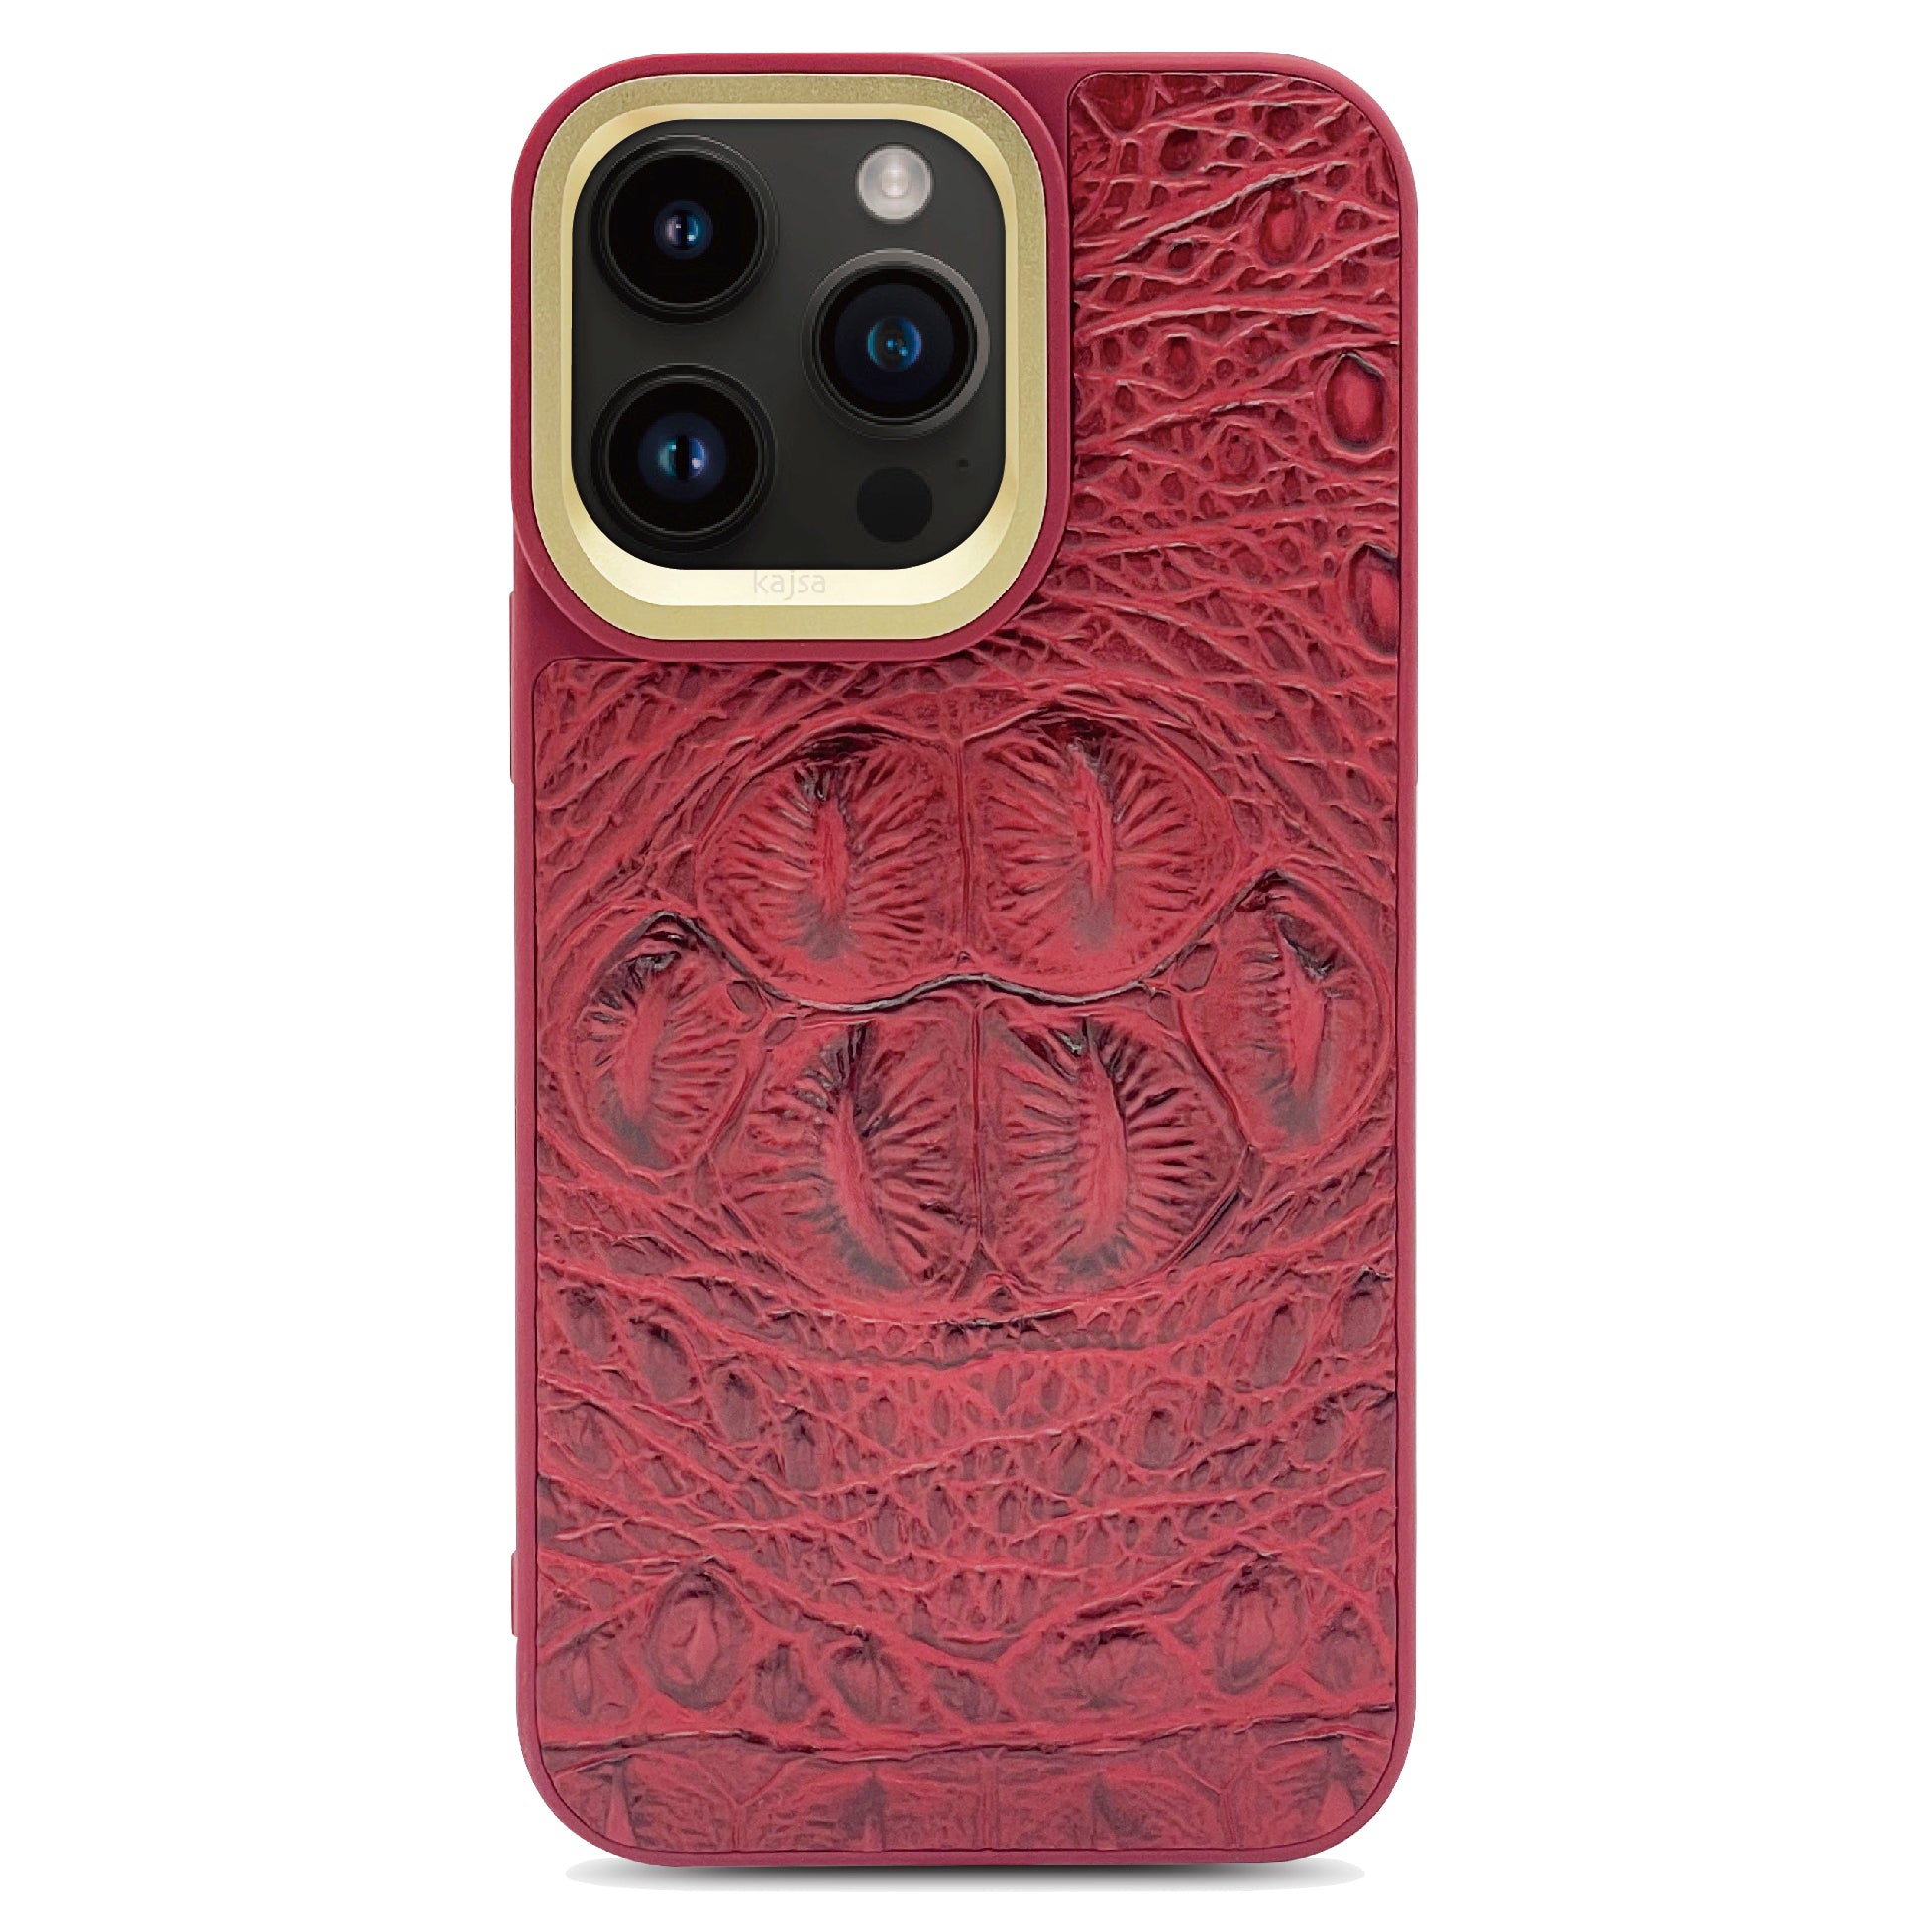 Noble Collection - Dragon Eye Back Case for iPhone 14-Phone Case- phone case - phone cases- phone cover- iphone cover- iphone case- iphone cases- leather case- leather cases- DIYCASE - custom case - leather cover - hand strap case - croco pattern case - snake pattern case - carbon fiber phone case - phone case brand - unique phone case - high quality - phone case brand - protective case - buy phone case hong kong - online buy phone case - iphone‎手機殼 - 客製化手機殼 - samsung ‎手機殼 - 香港手機殼 - 買電話殼